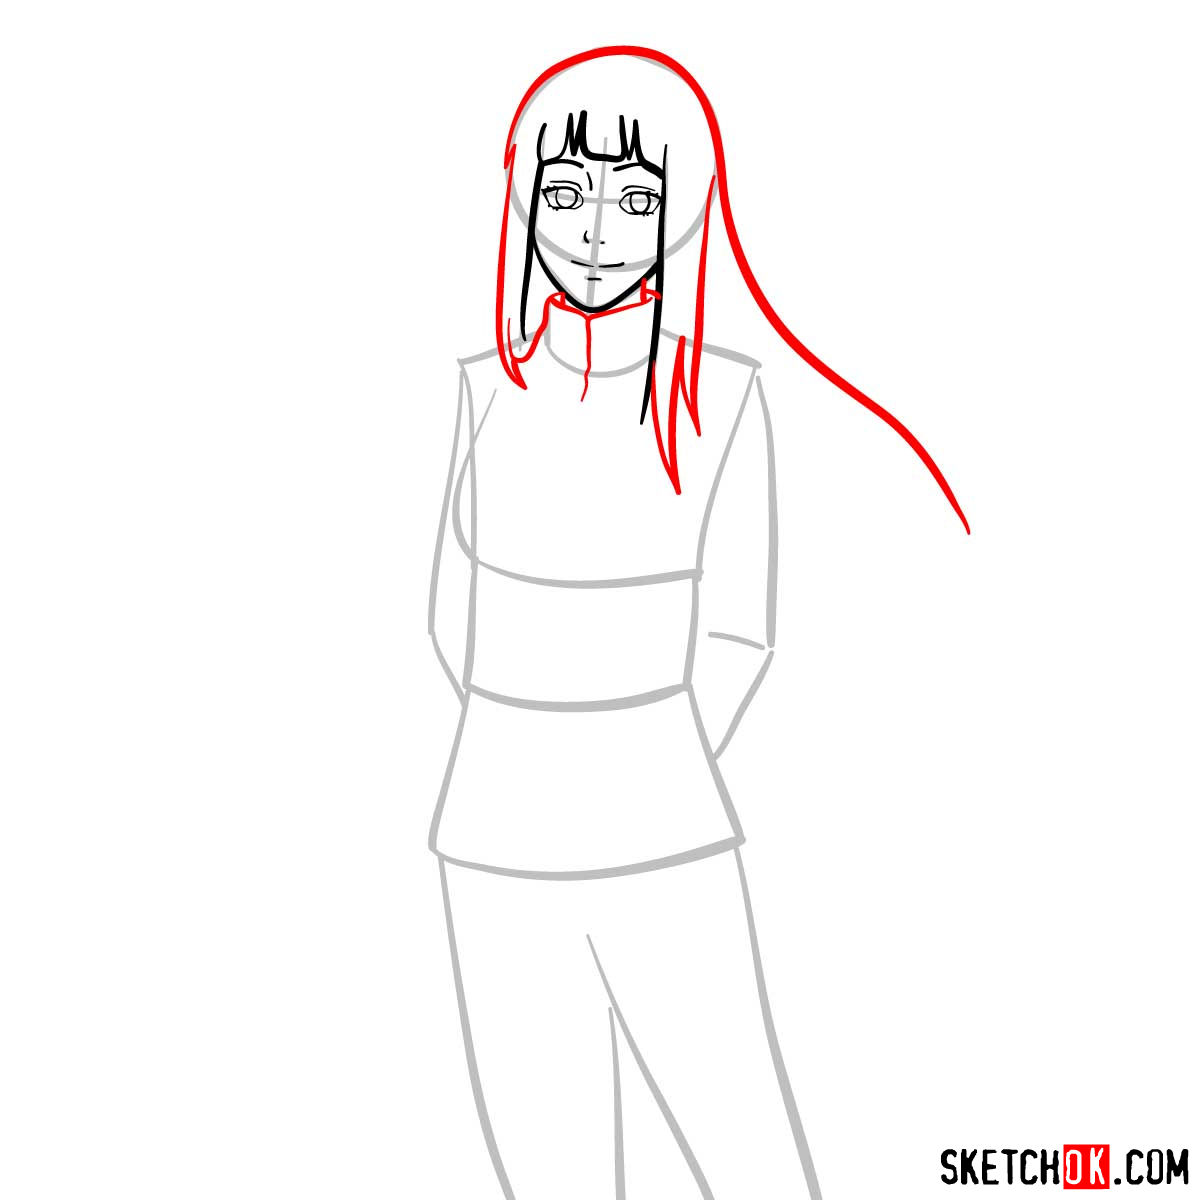 How to draw Hinata from Naruto anime - step 05